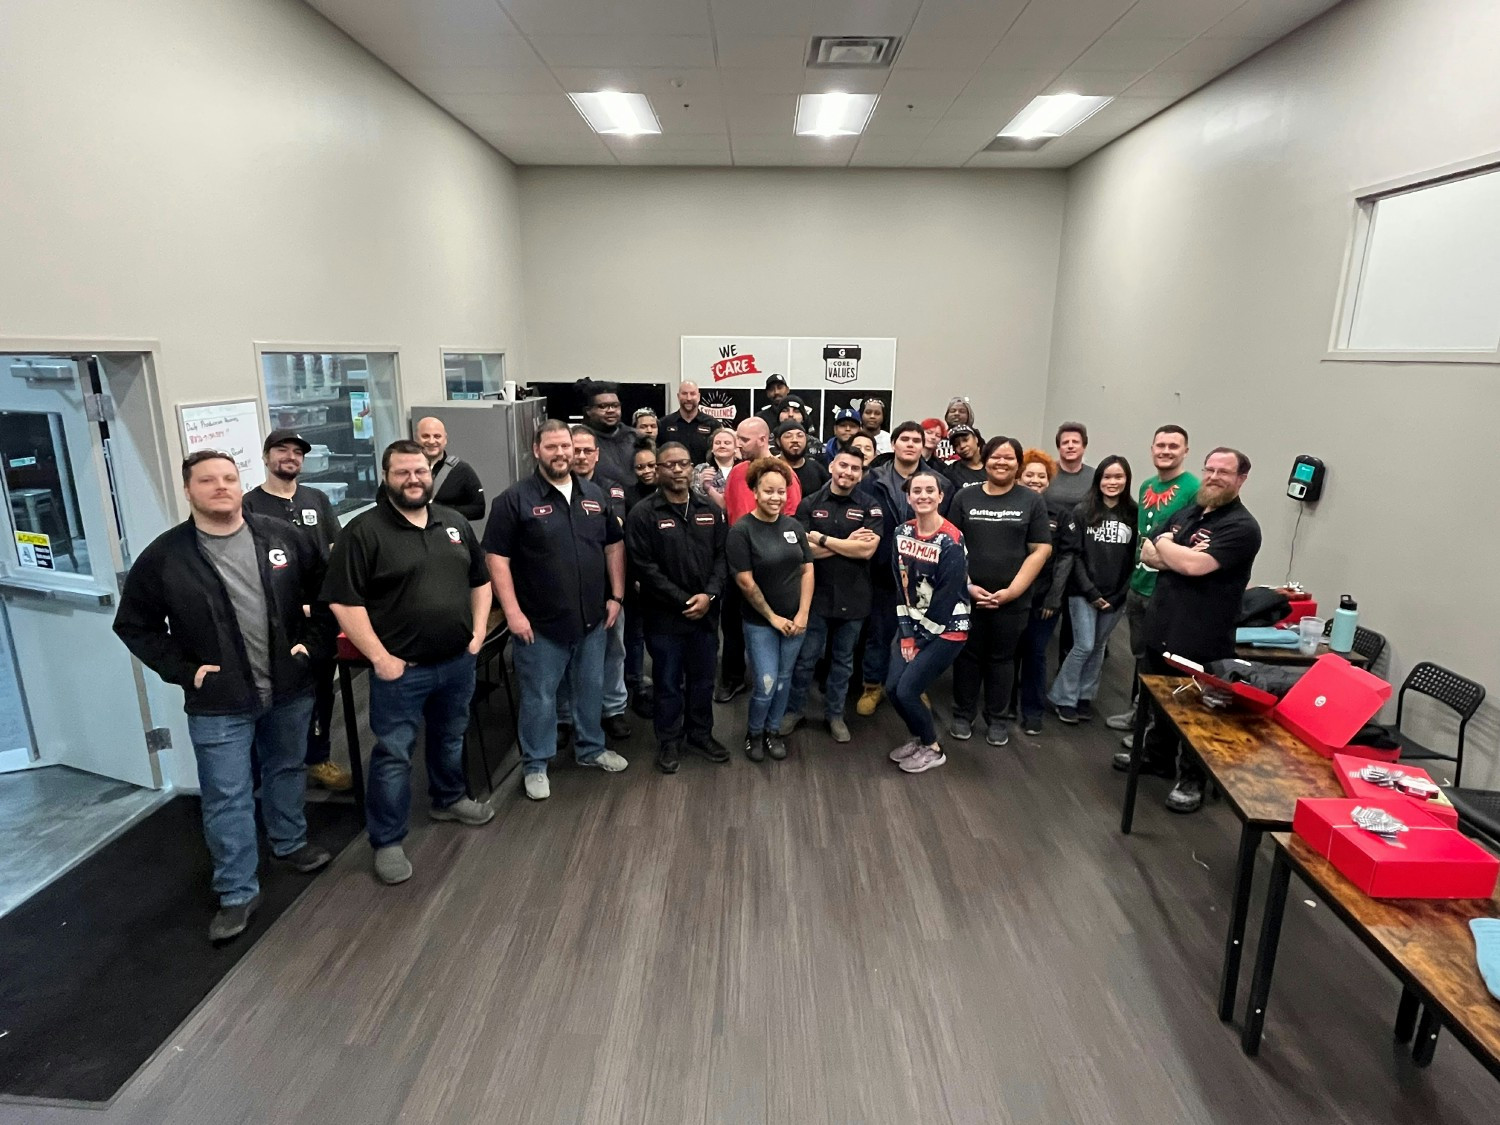 Christmas with one of our manufacturing teams.